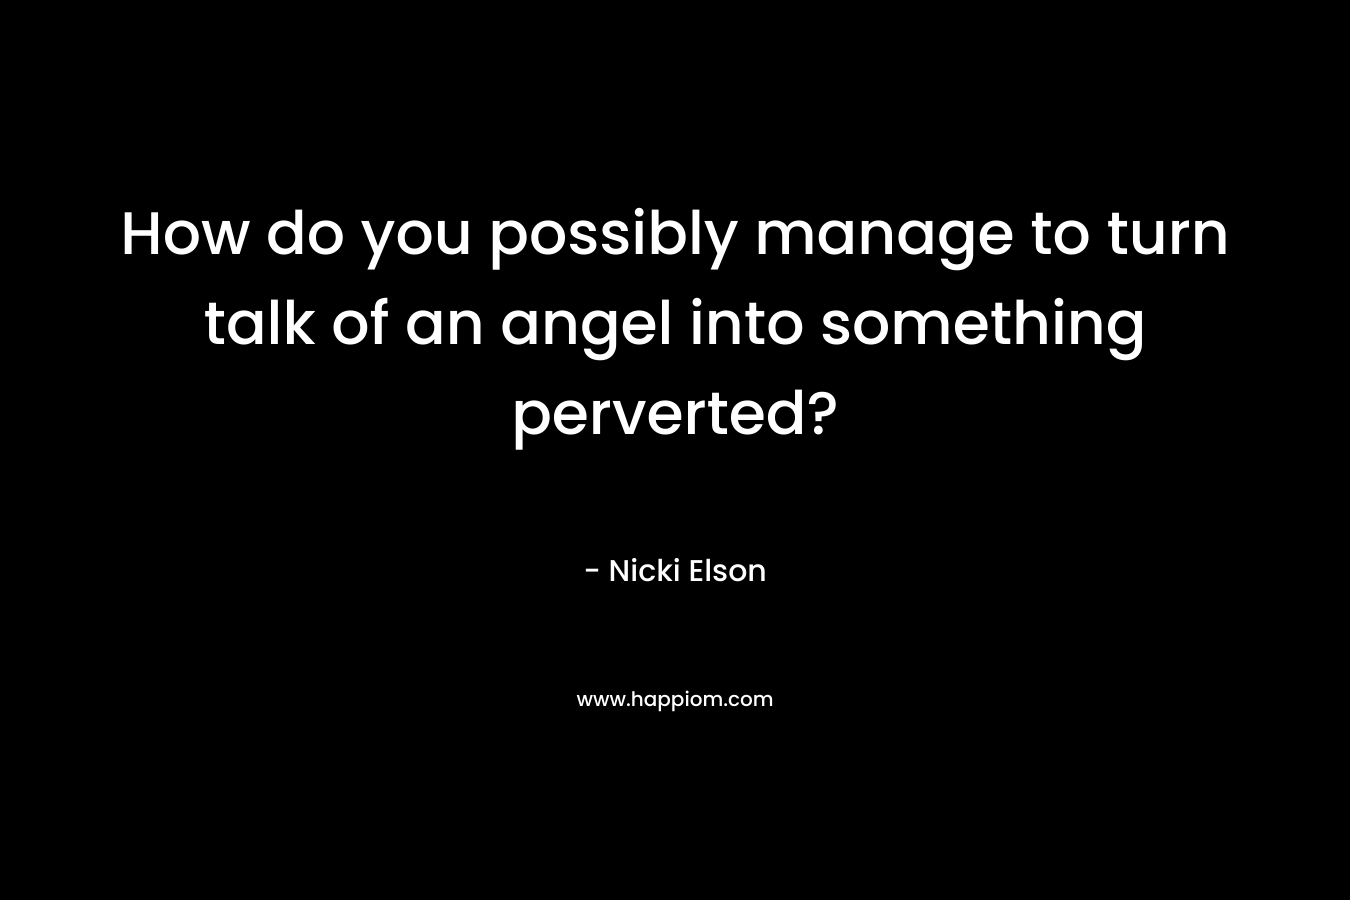 How do you possibly manage to turn talk of an angel into something perverted? – Nicki Elson